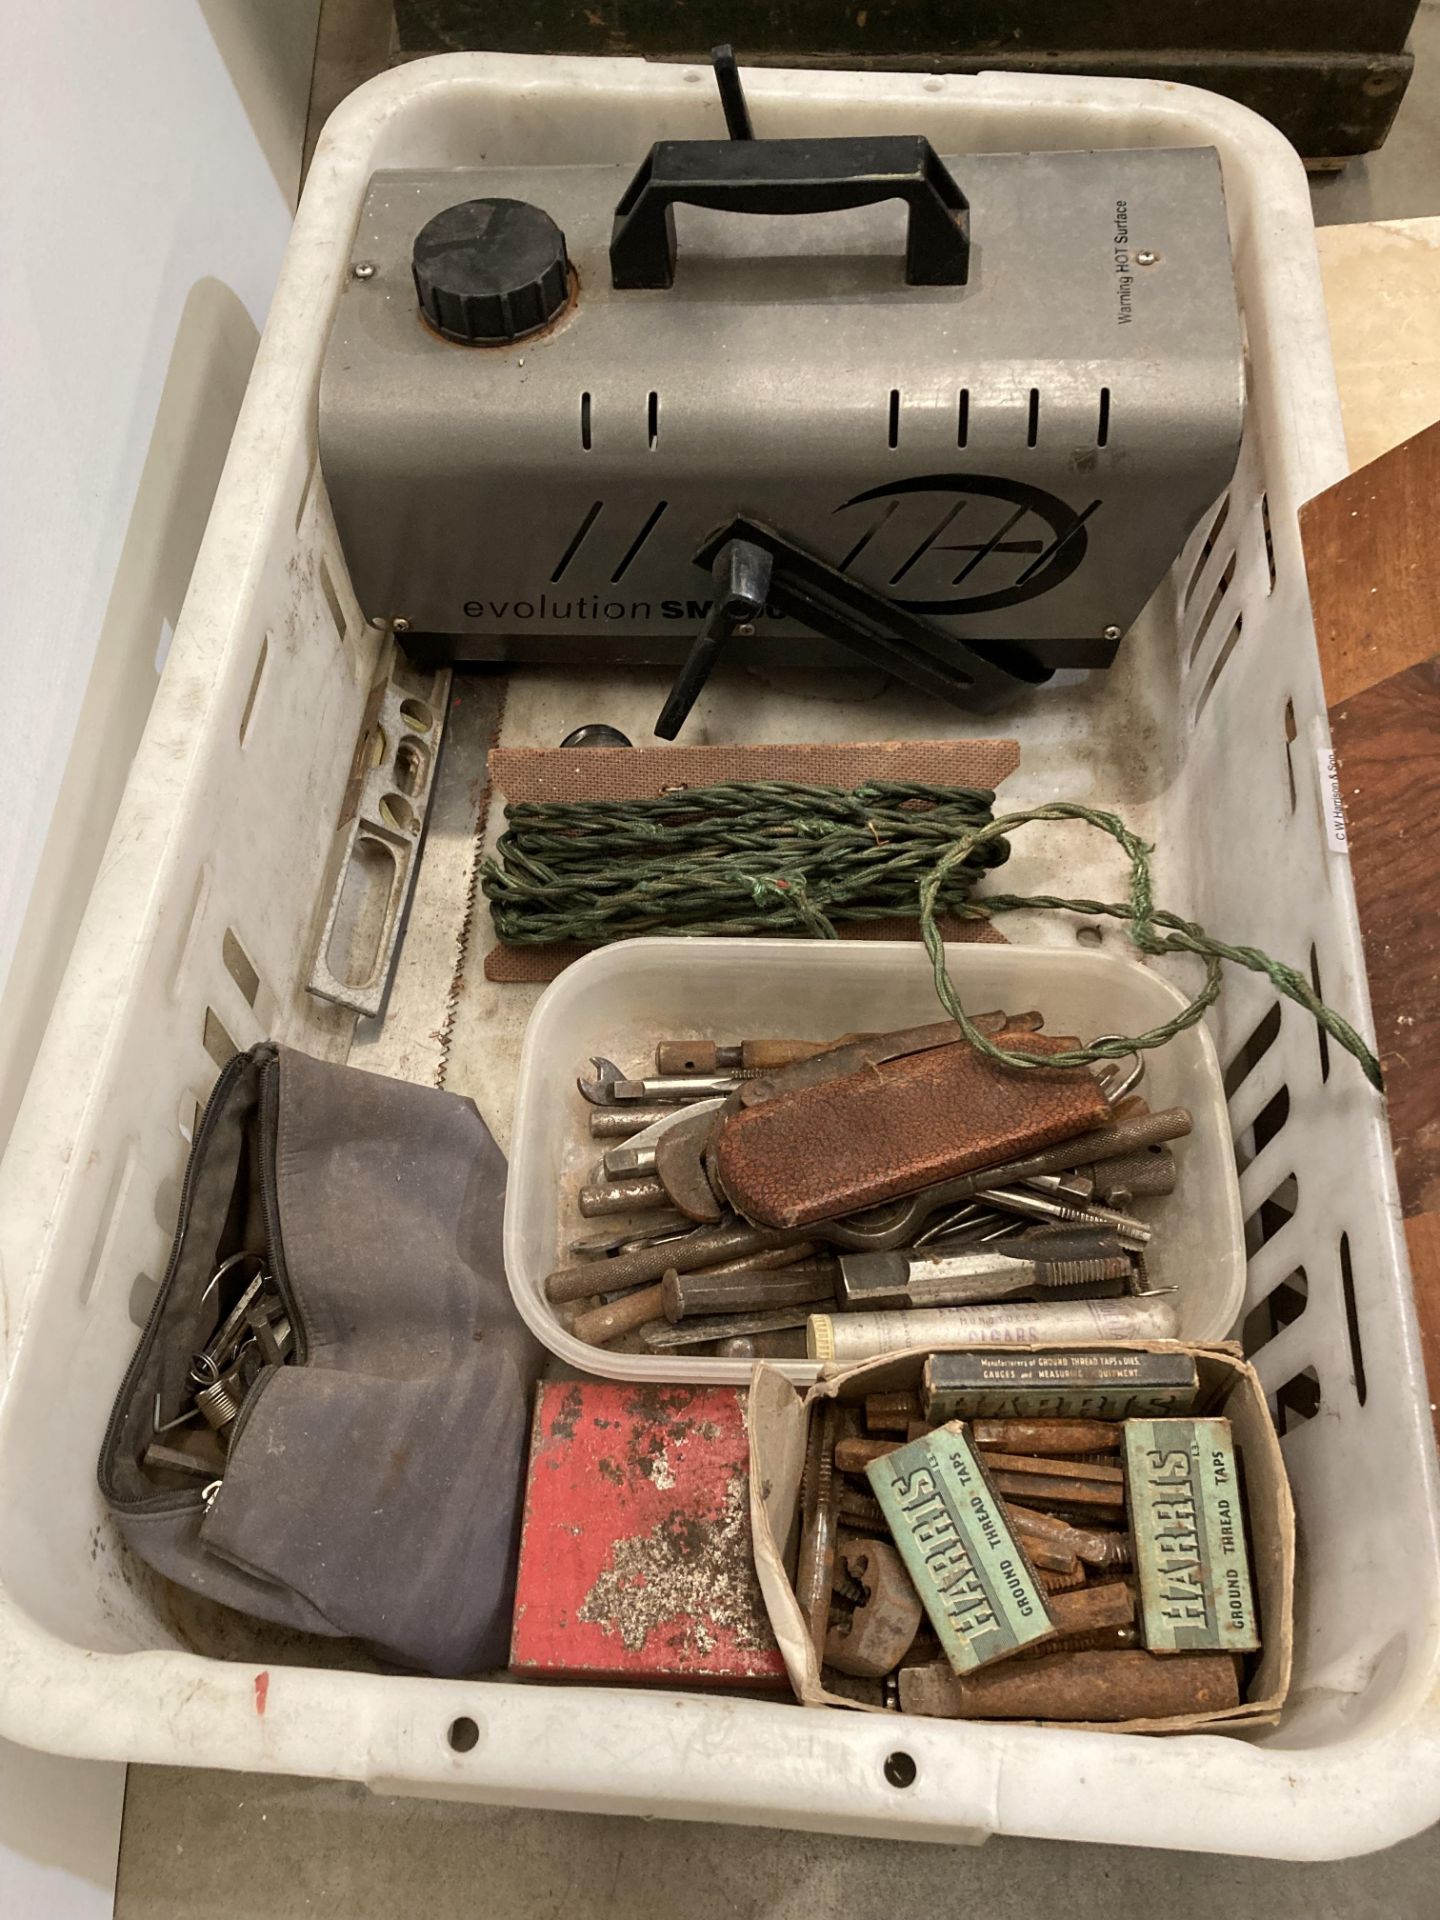 Contents to crate - tap and die sets, measuring equipment, chisels, - Image 2 of 2